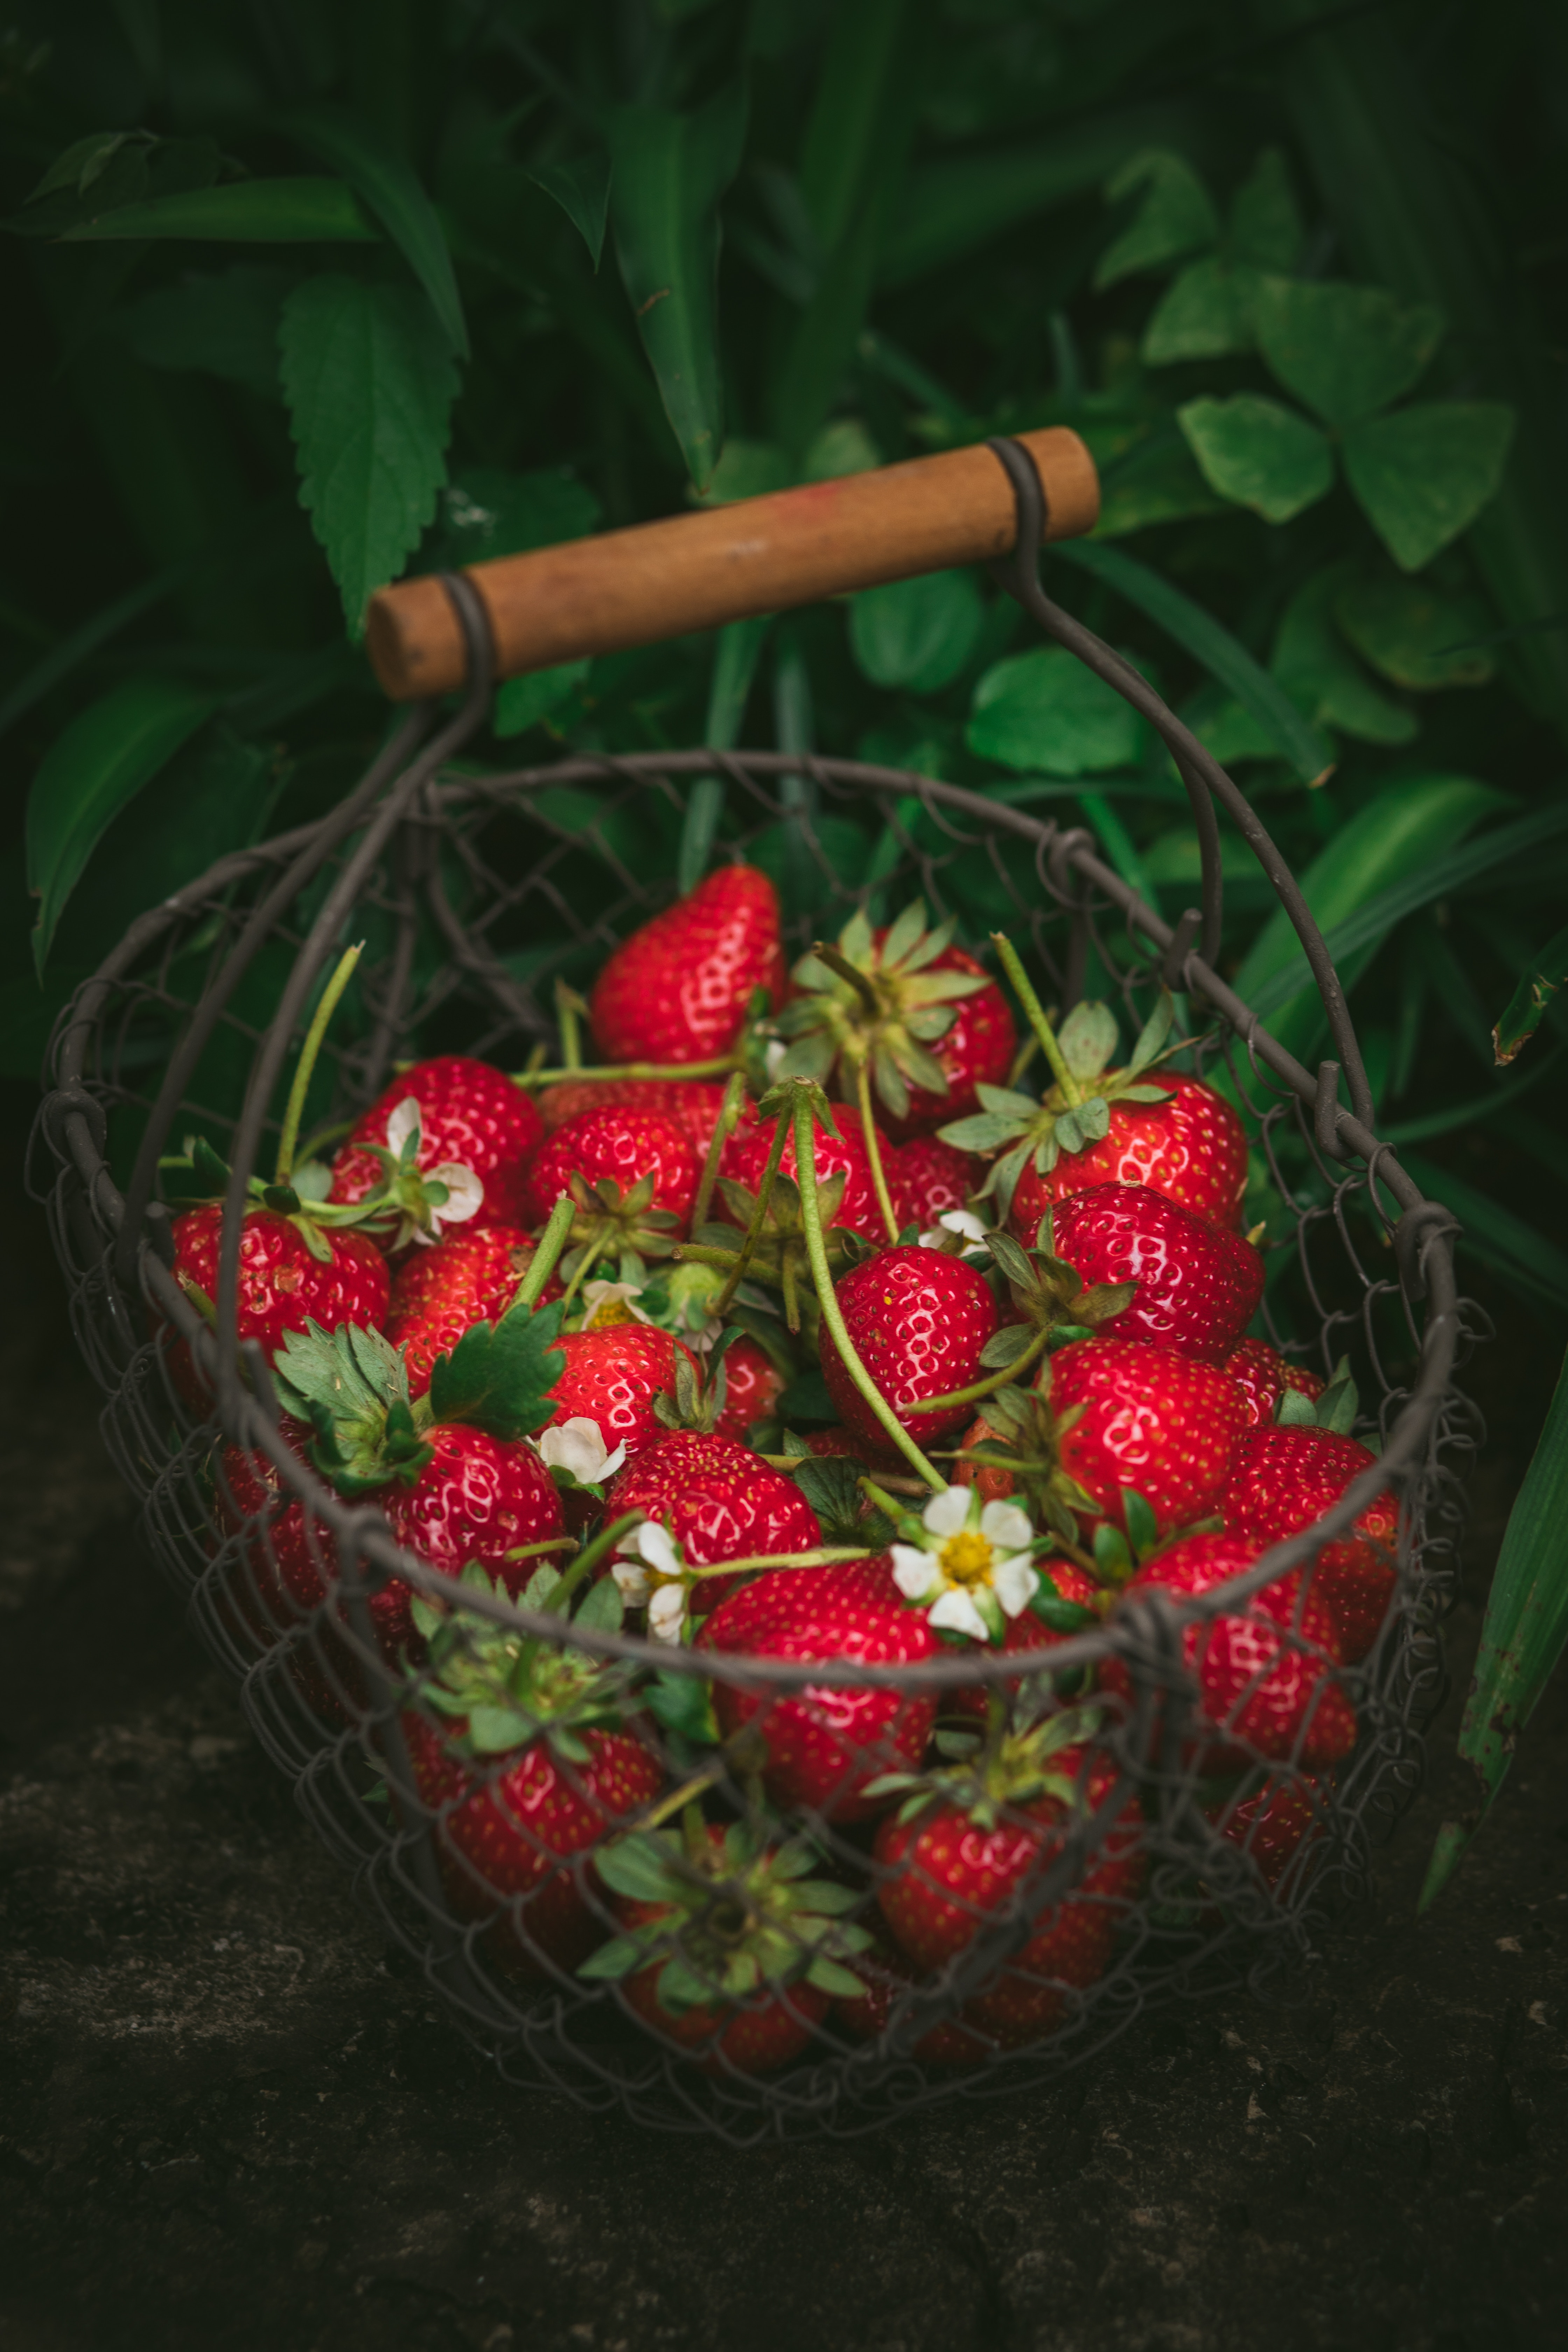 strawberry, berries, fresh, food, red, basket, ripe cellphone